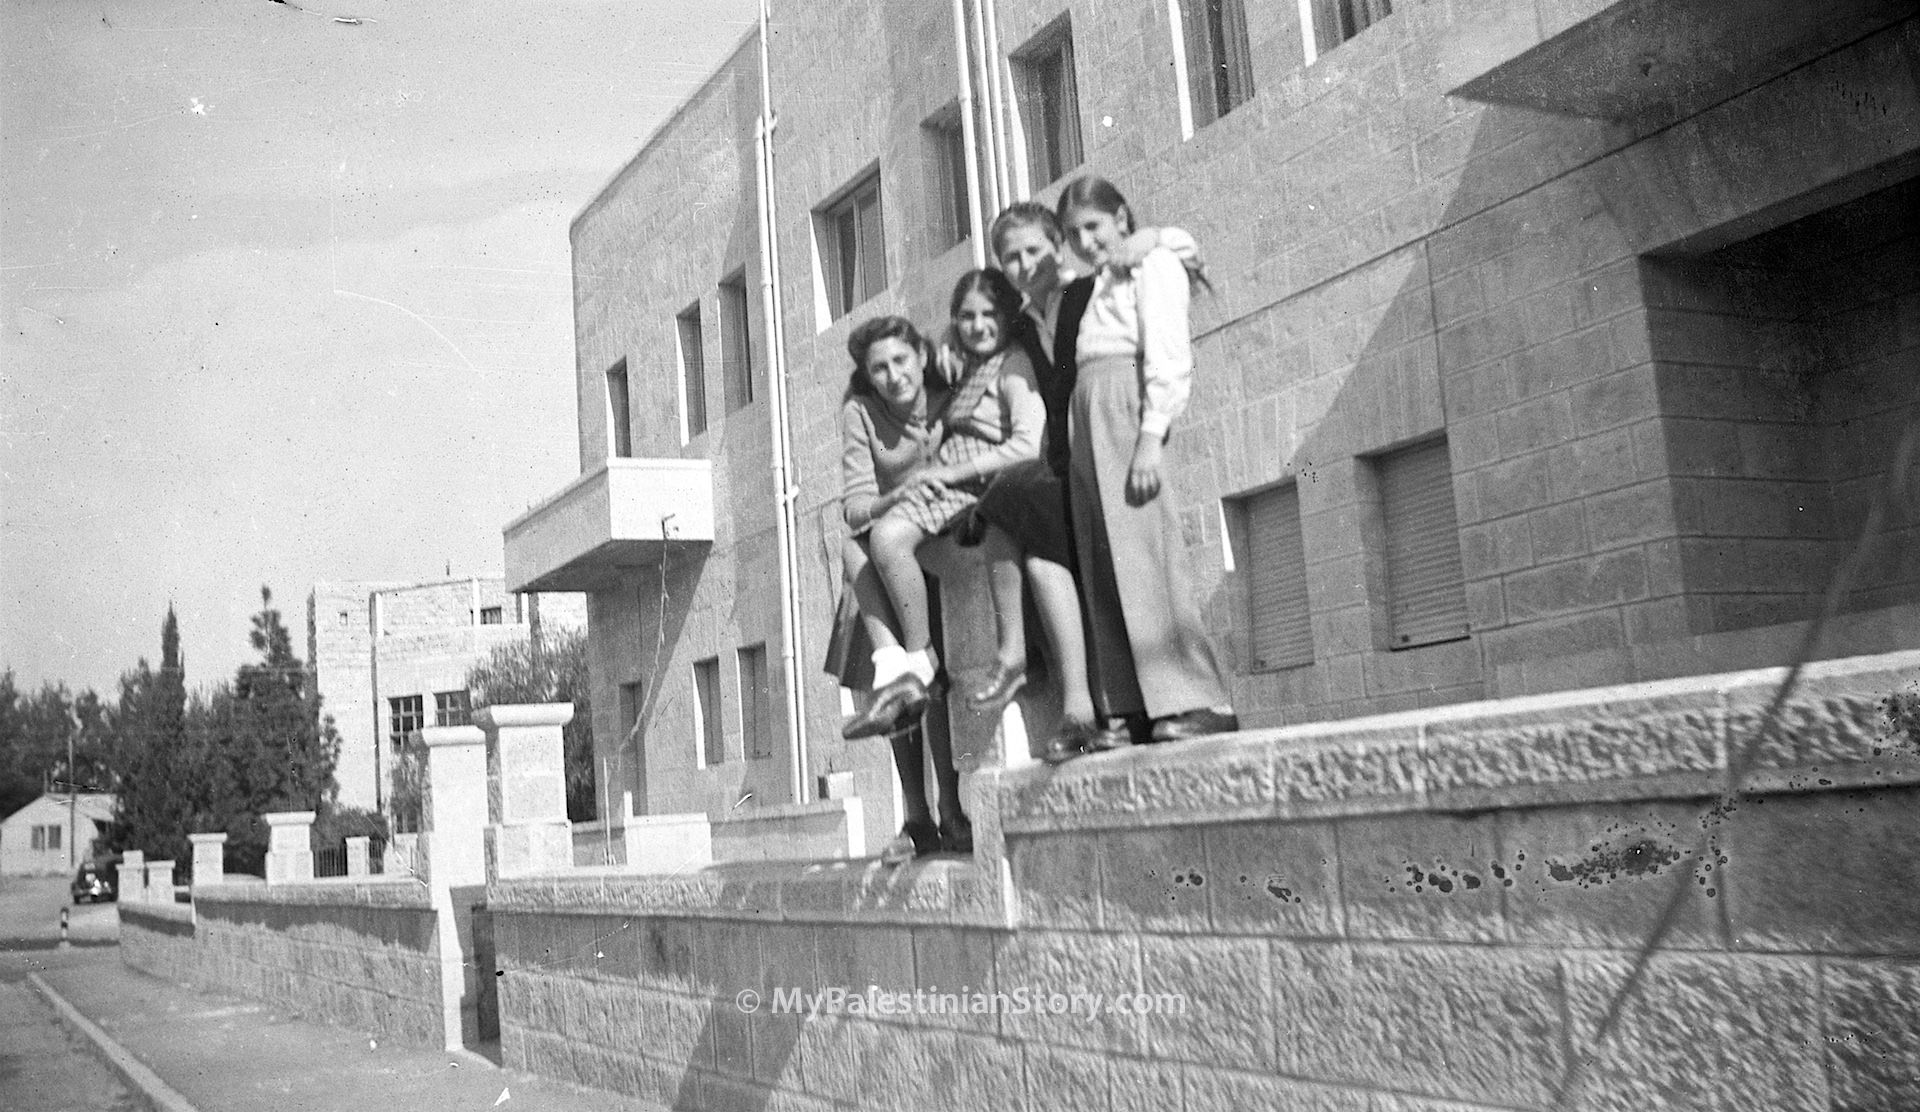 Feely, Jenny, Anna, Mary on the fencing wall of what was to be the Jordanian Embassy